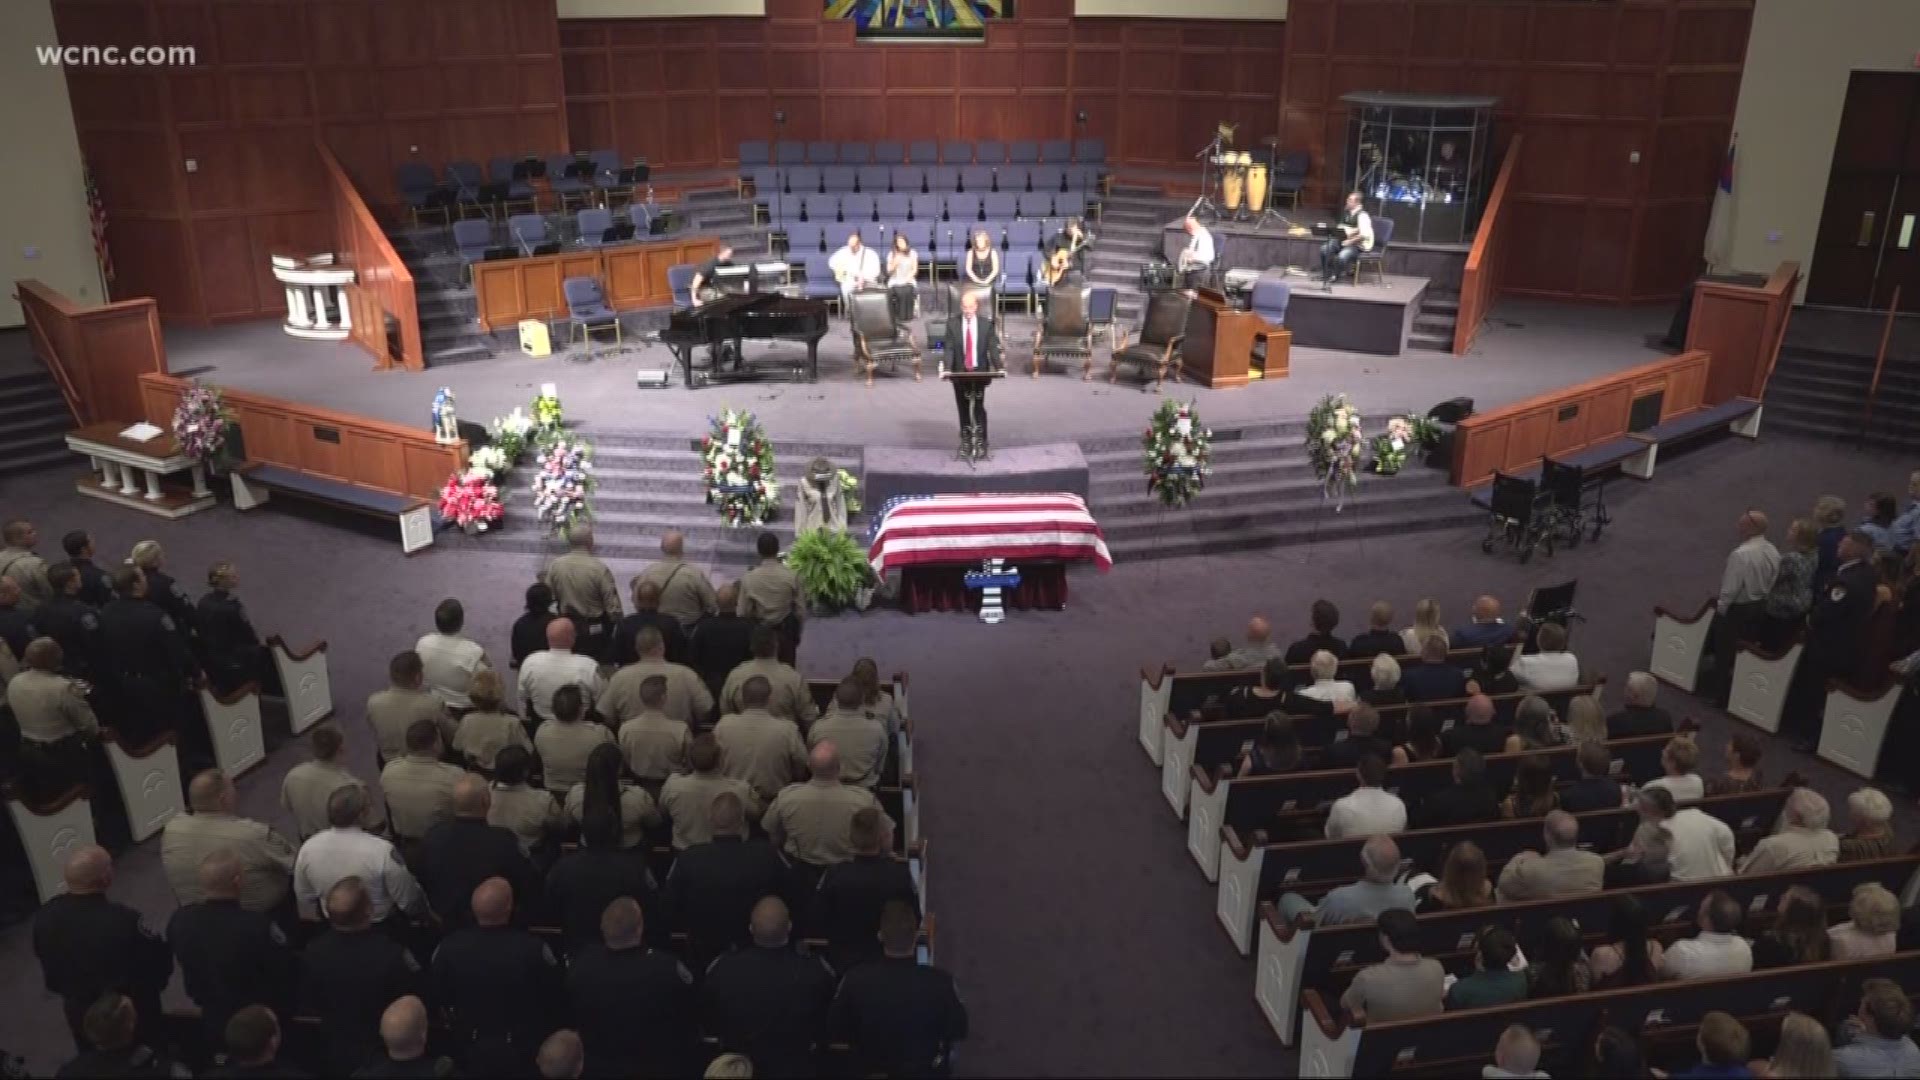 Friends, family members and brothers and sisters in blue gathered at First Assembly of God in Gastonia to celebrate the life of a deputy who was killed in the Bessemer City restaurant rampage.